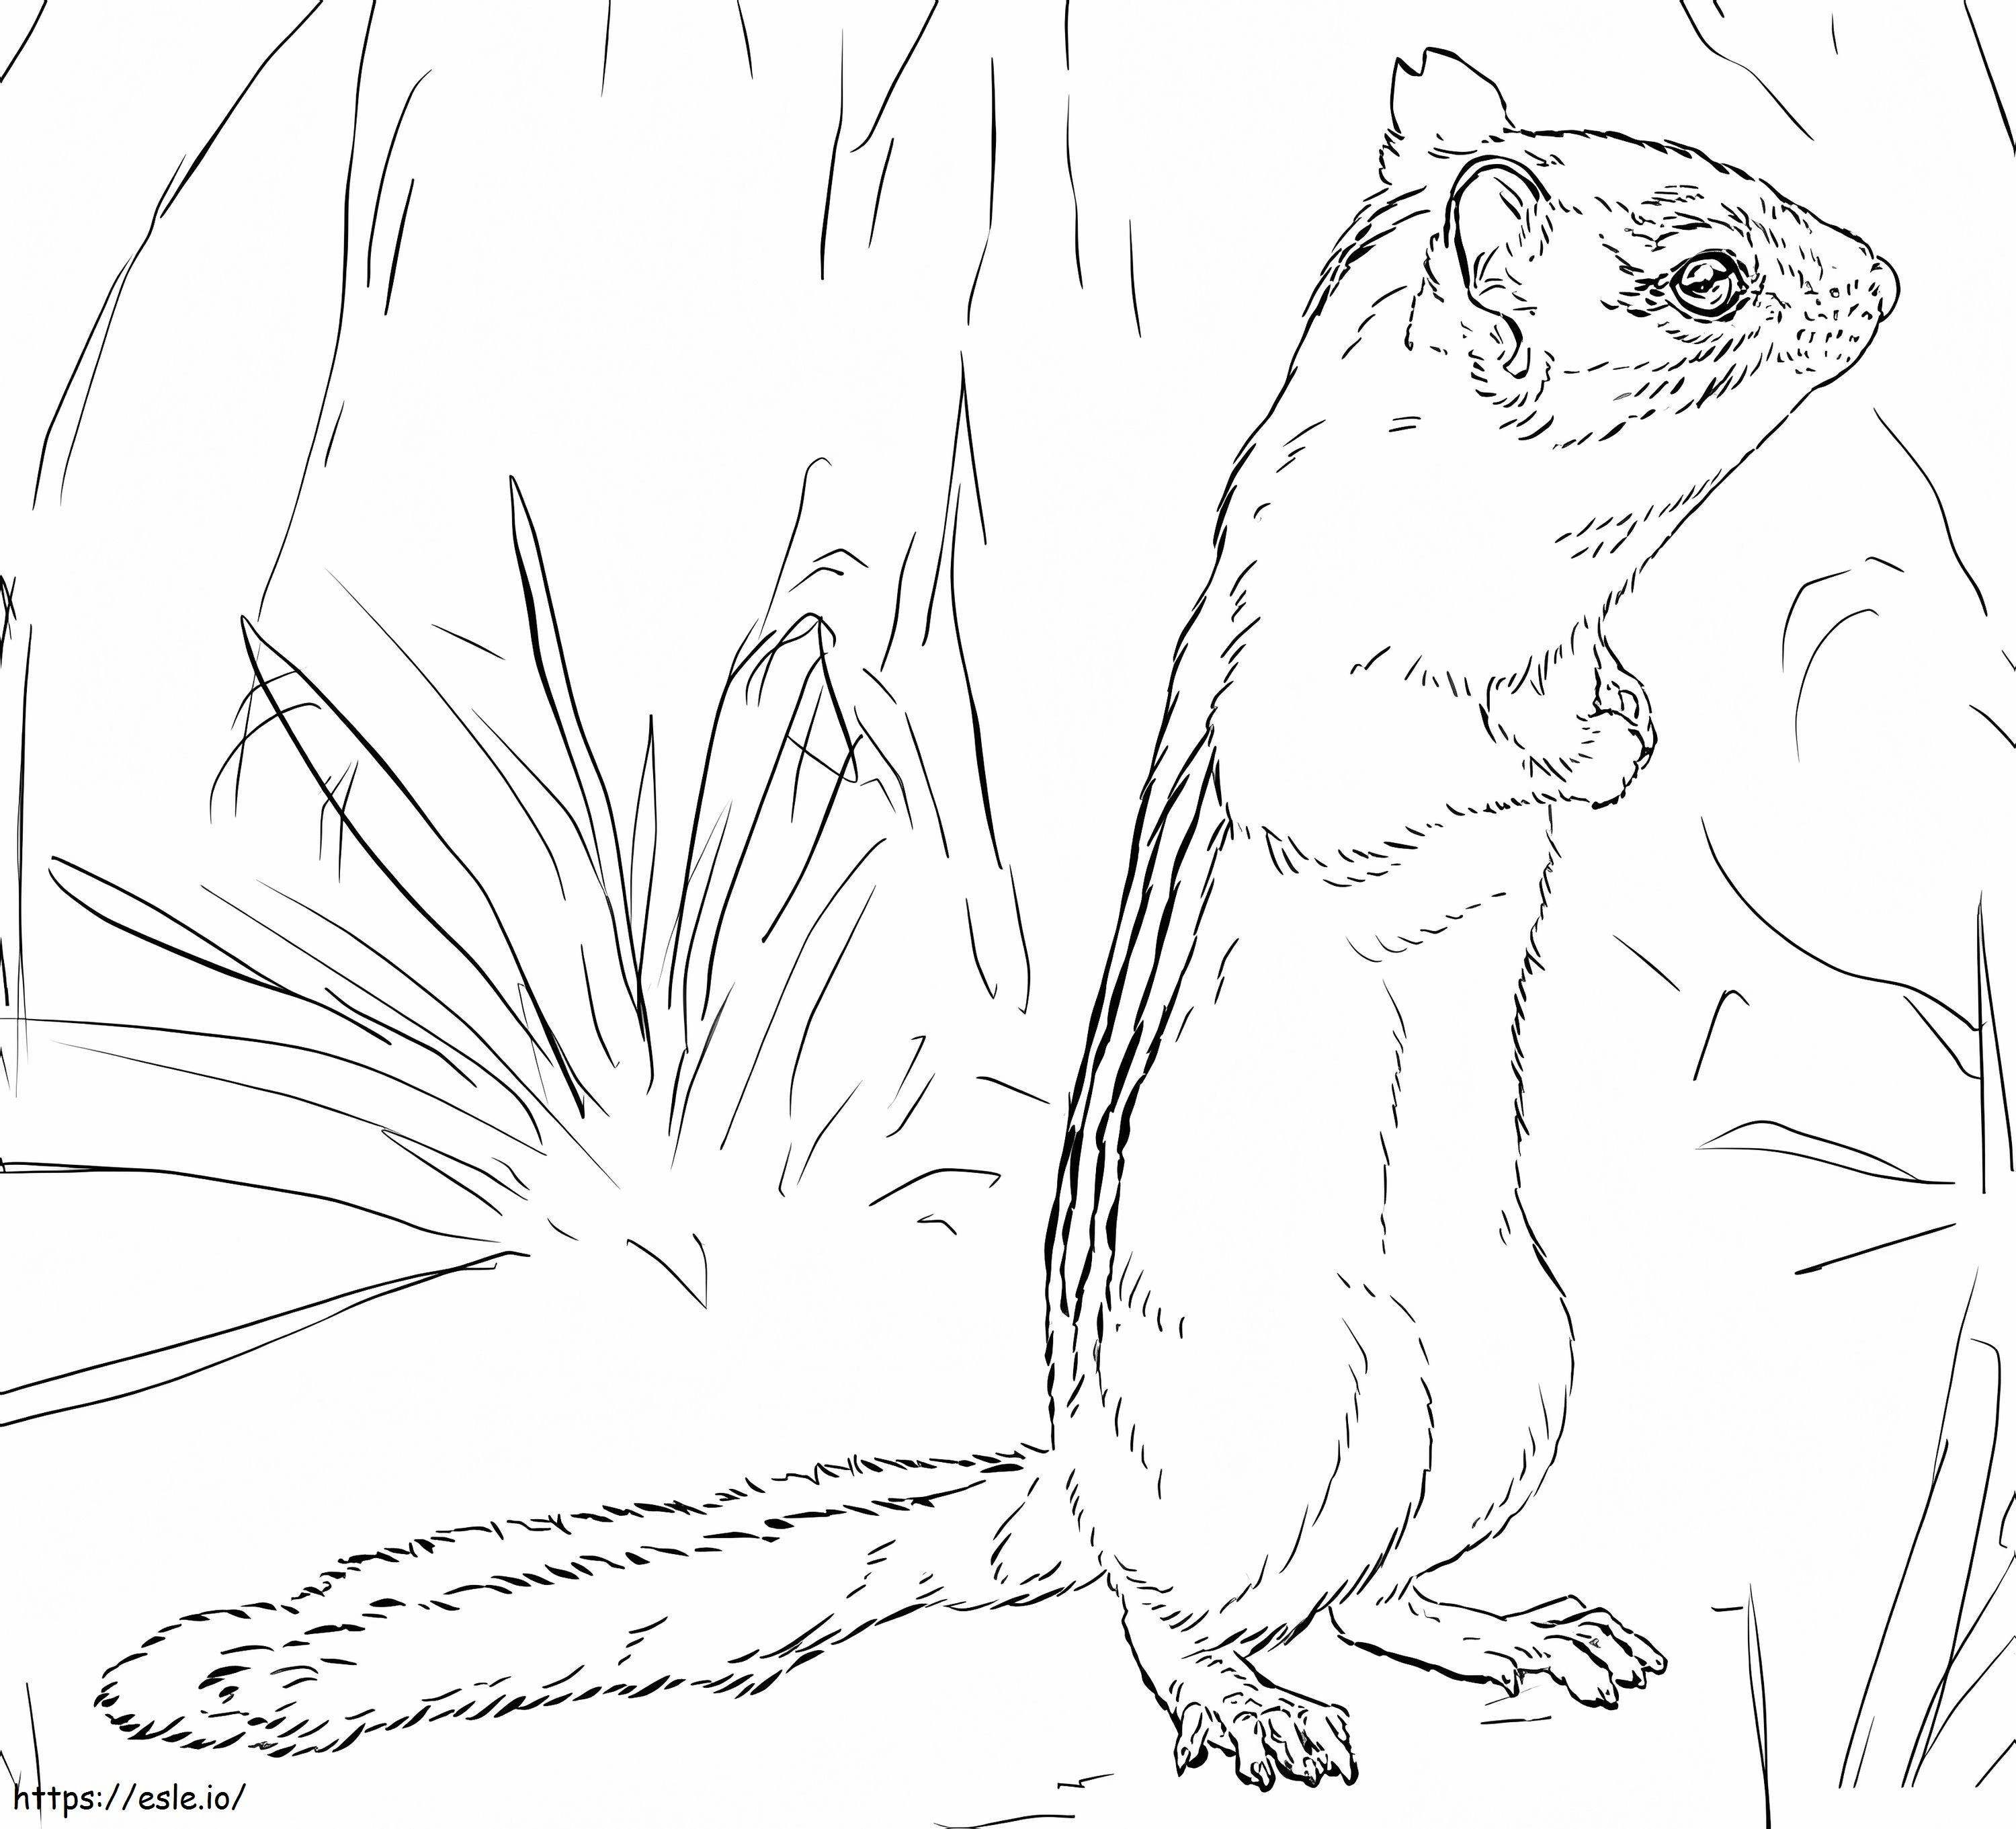 Chipmunk On Ground coloring page